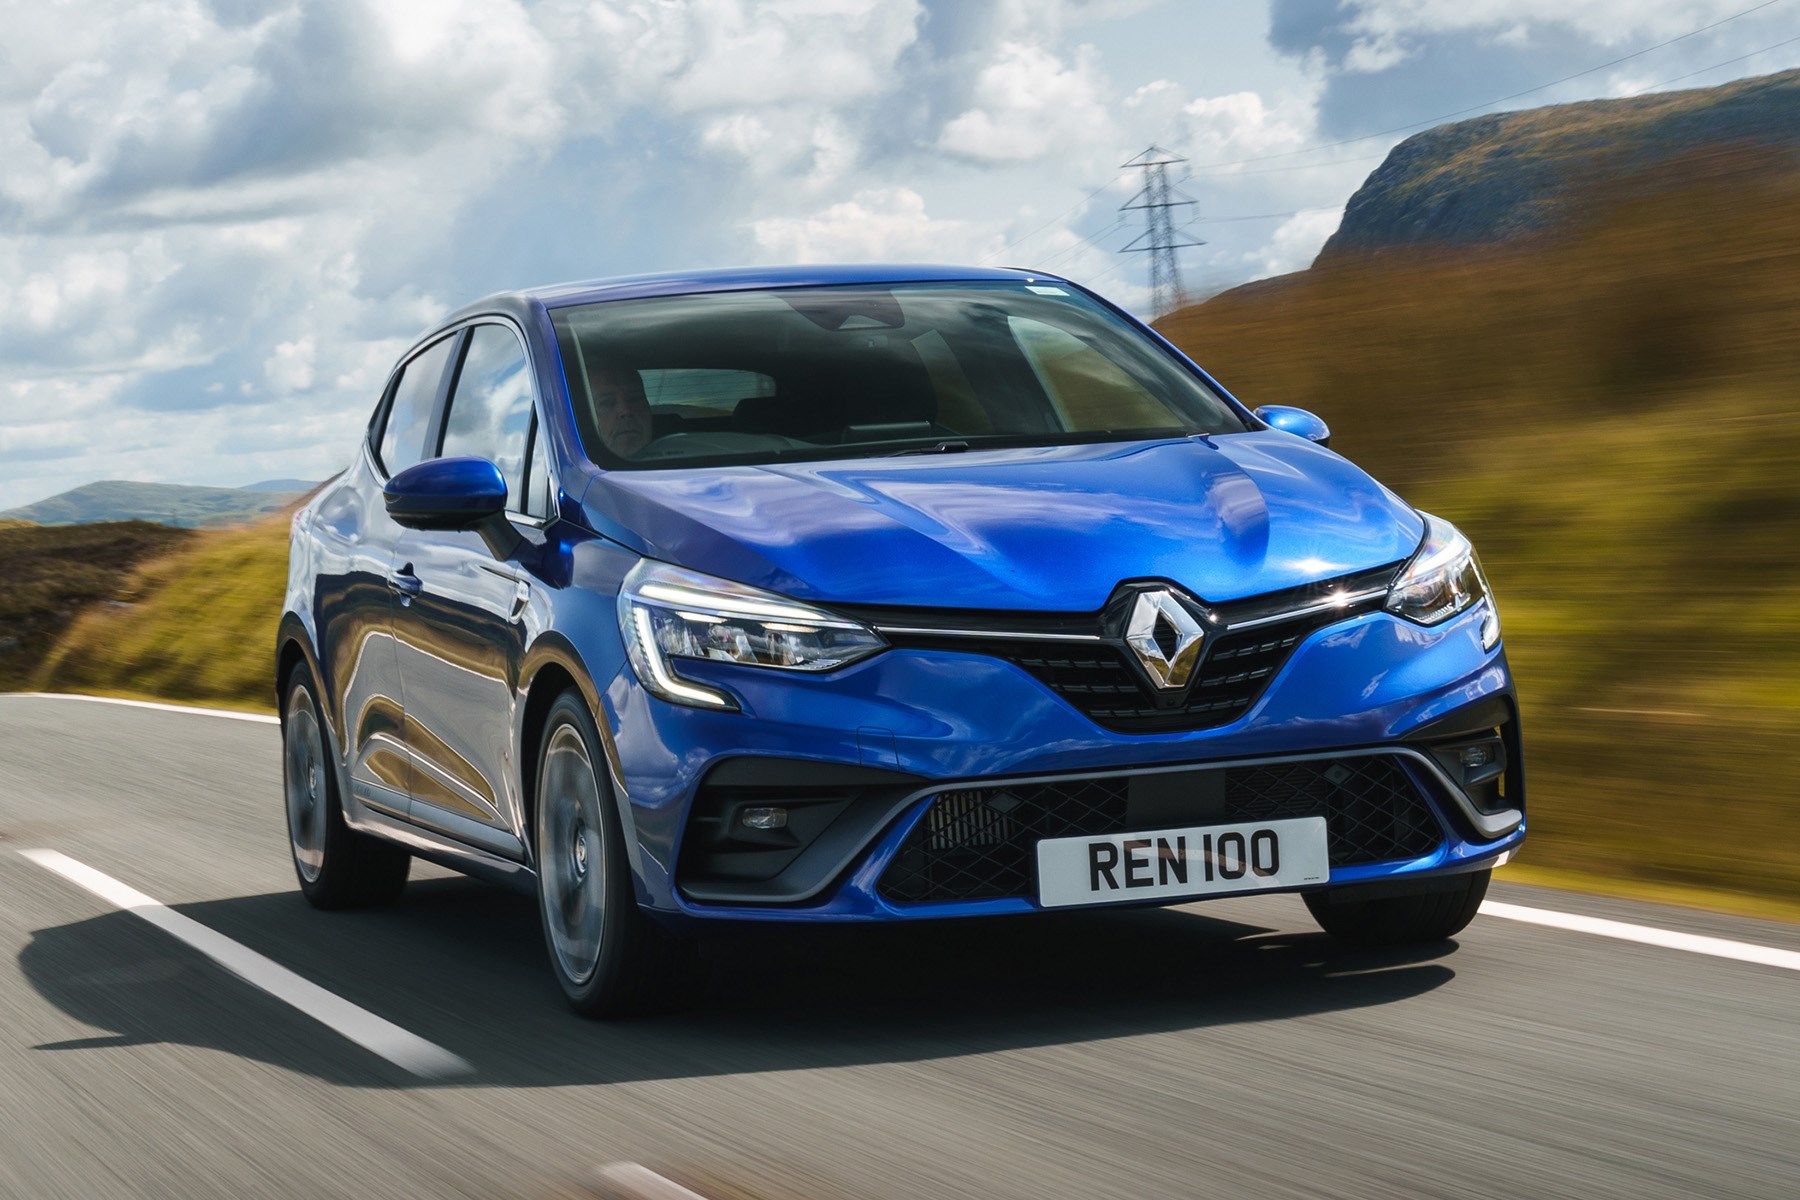 Renault Clio Review (2020)